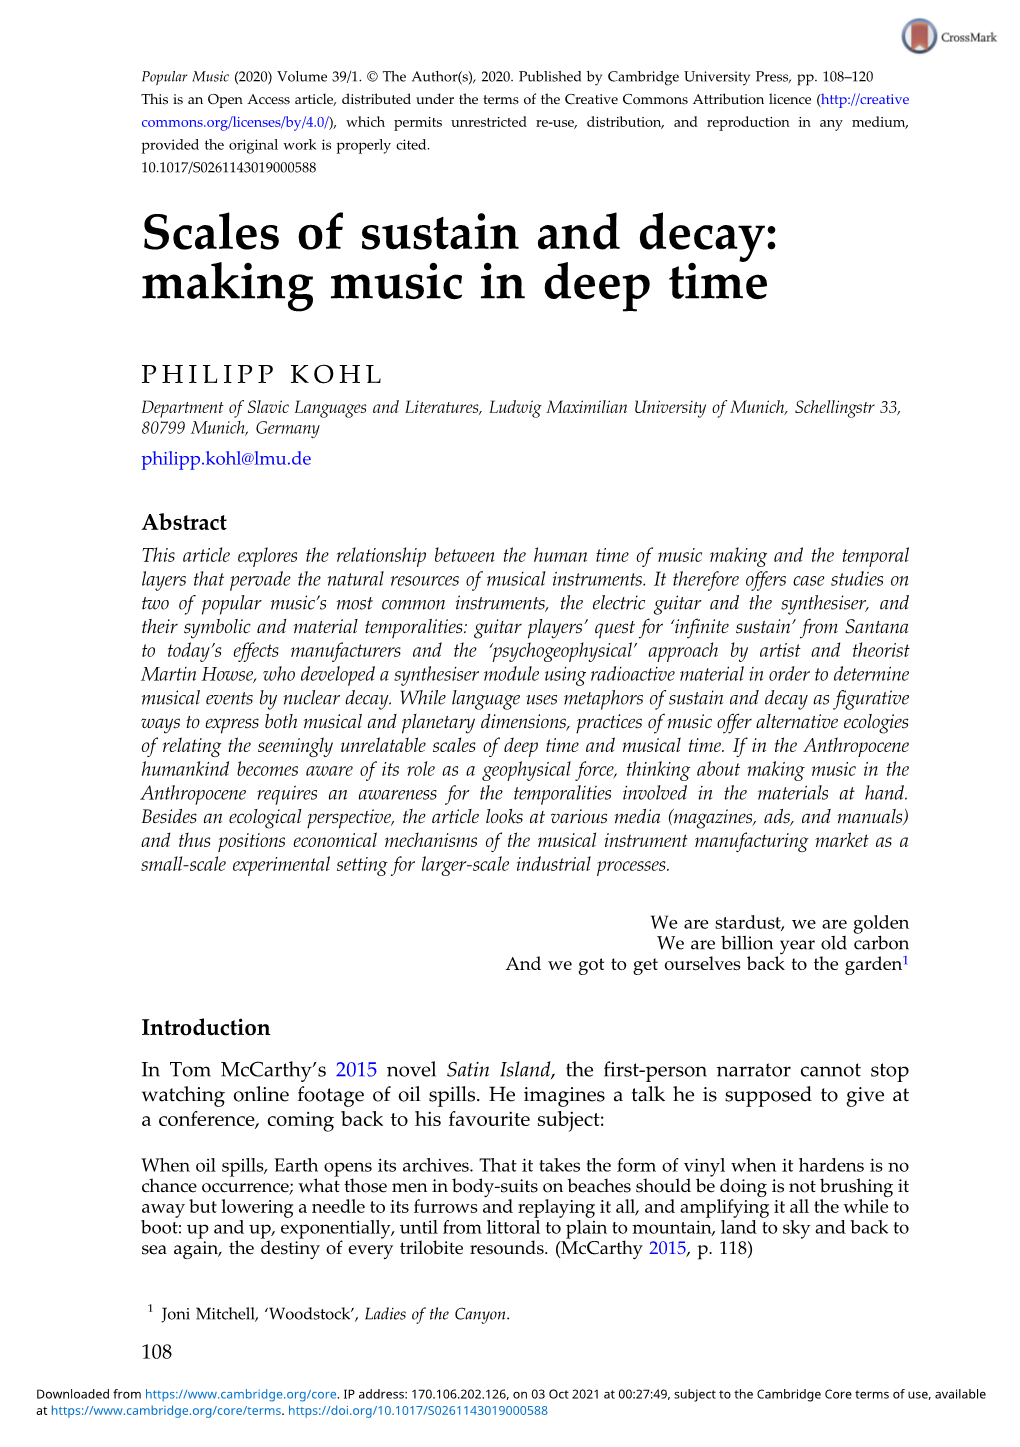 Scales of Sustain and Decay: Making Music in Deep Time